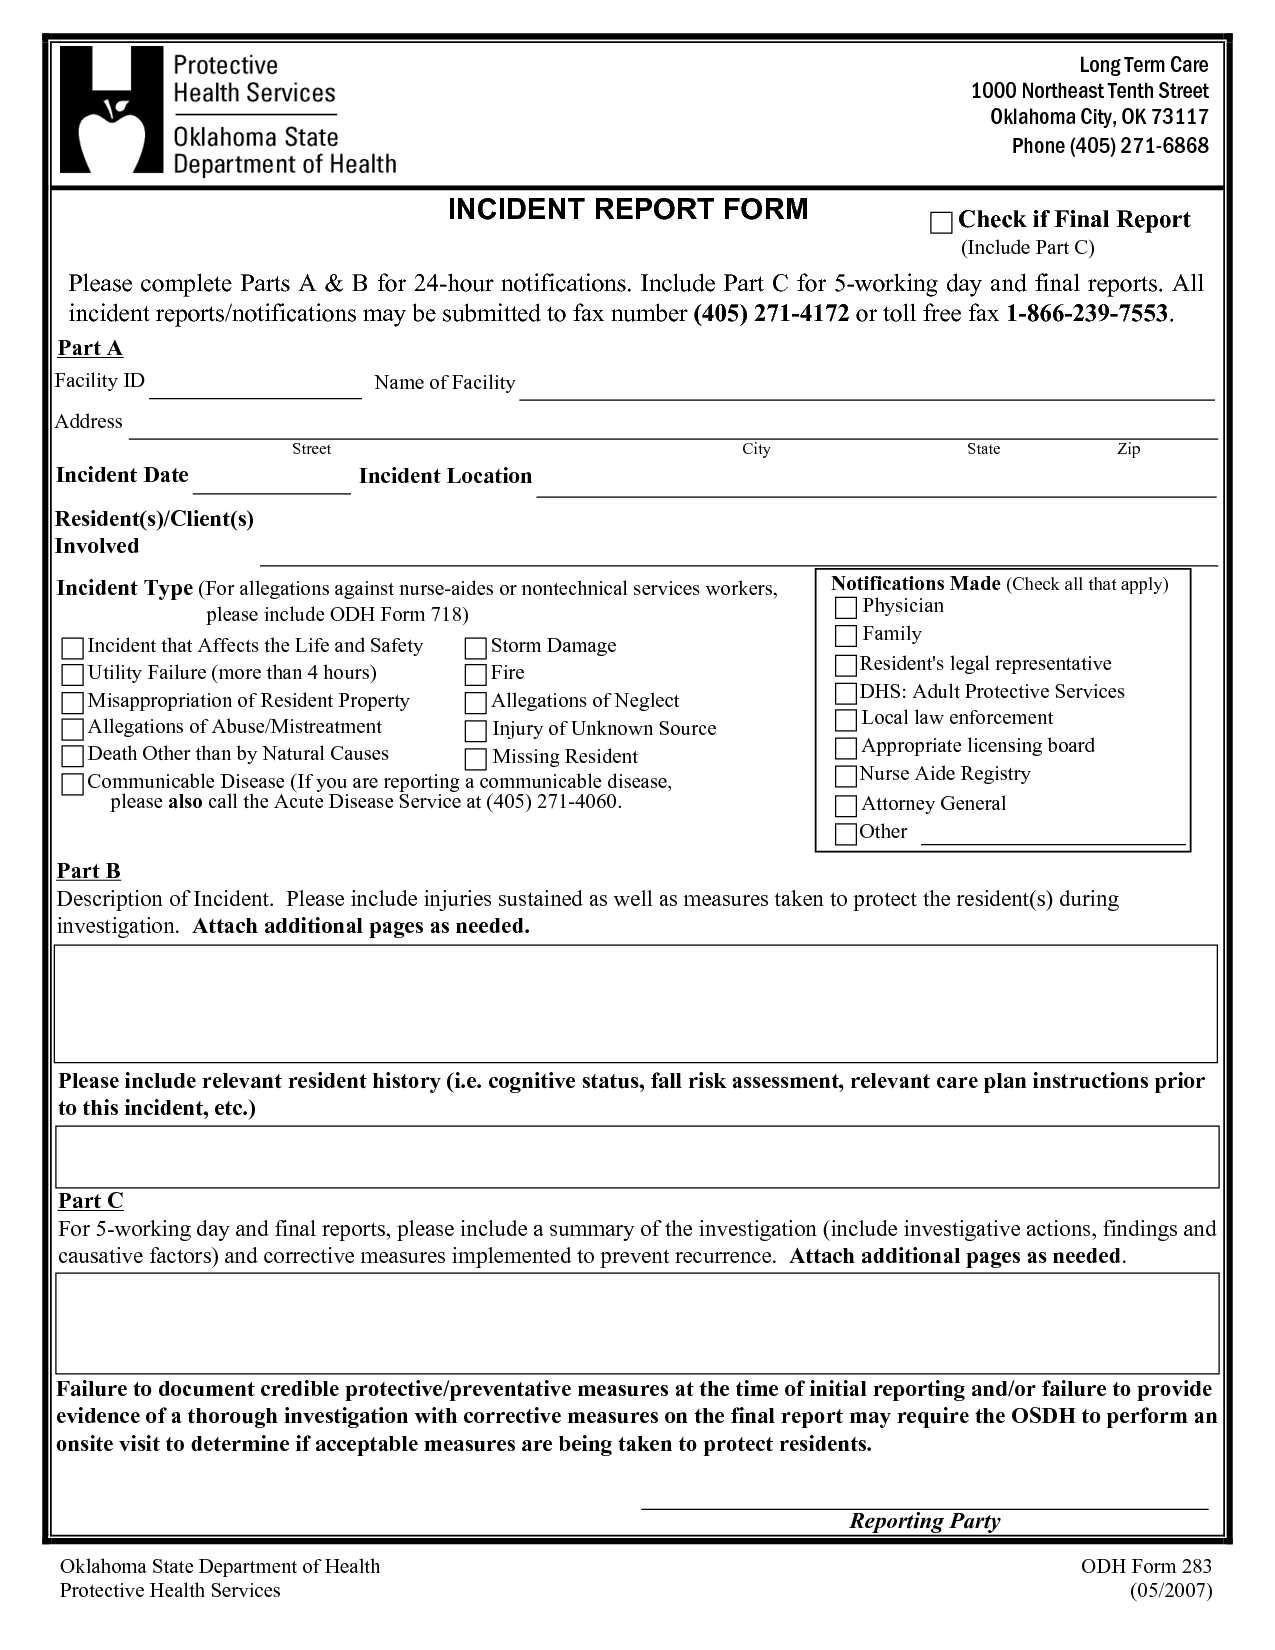 Security Incident Report Format Sample And Information Security Incident Report Form Template